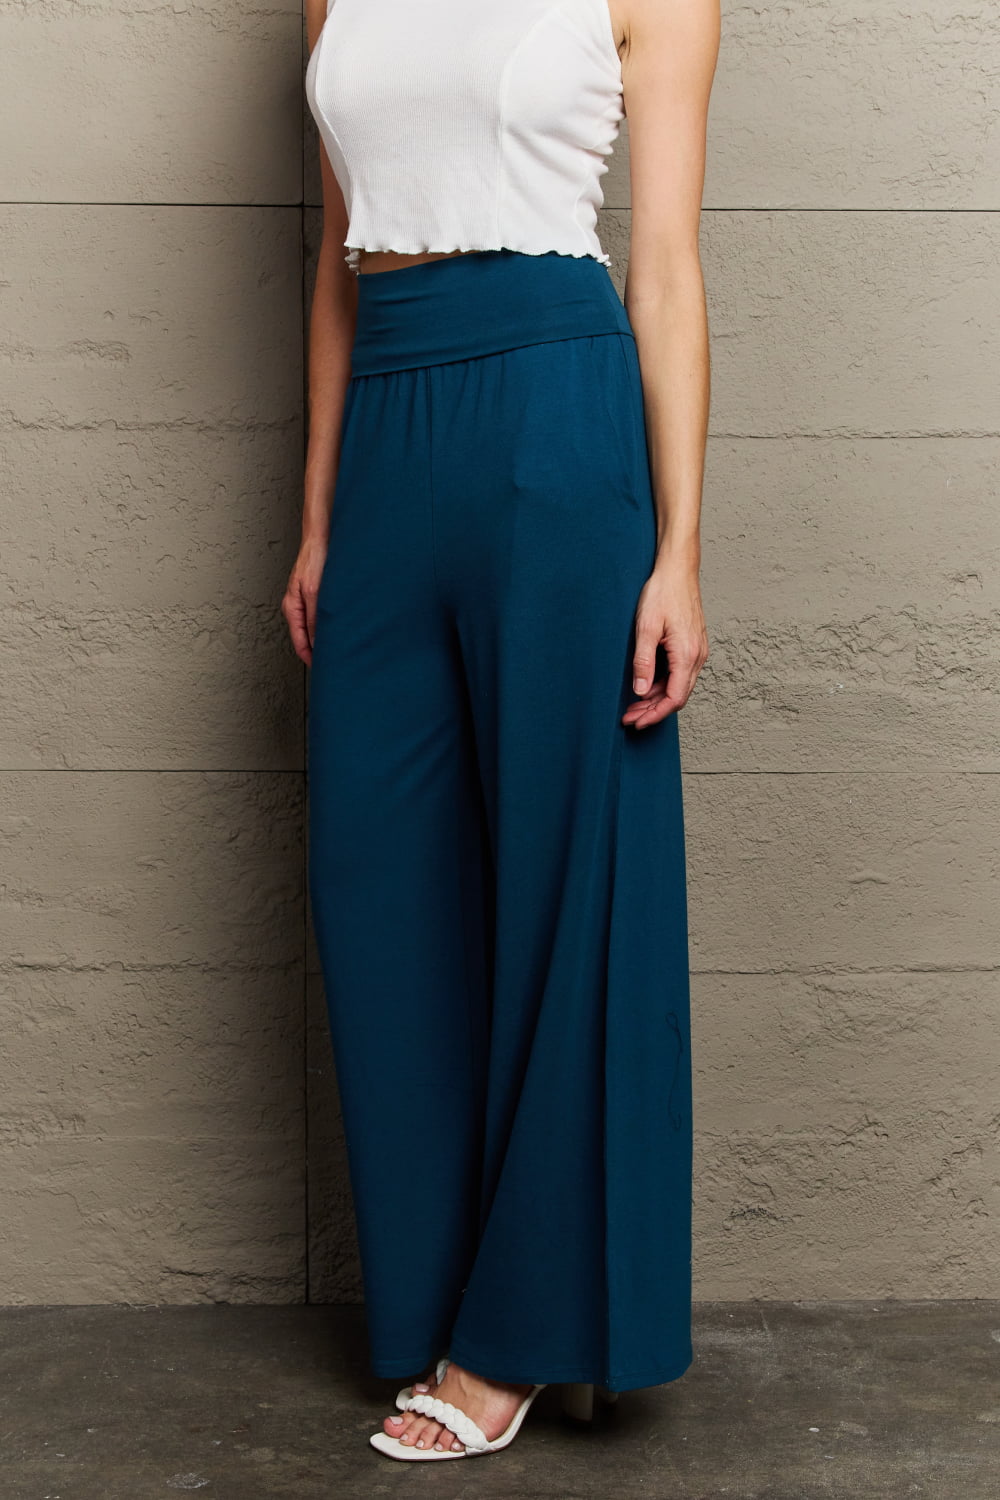 Blue Solid Palazzo Pants With Tassels At The Bottom – FusionBeats.in